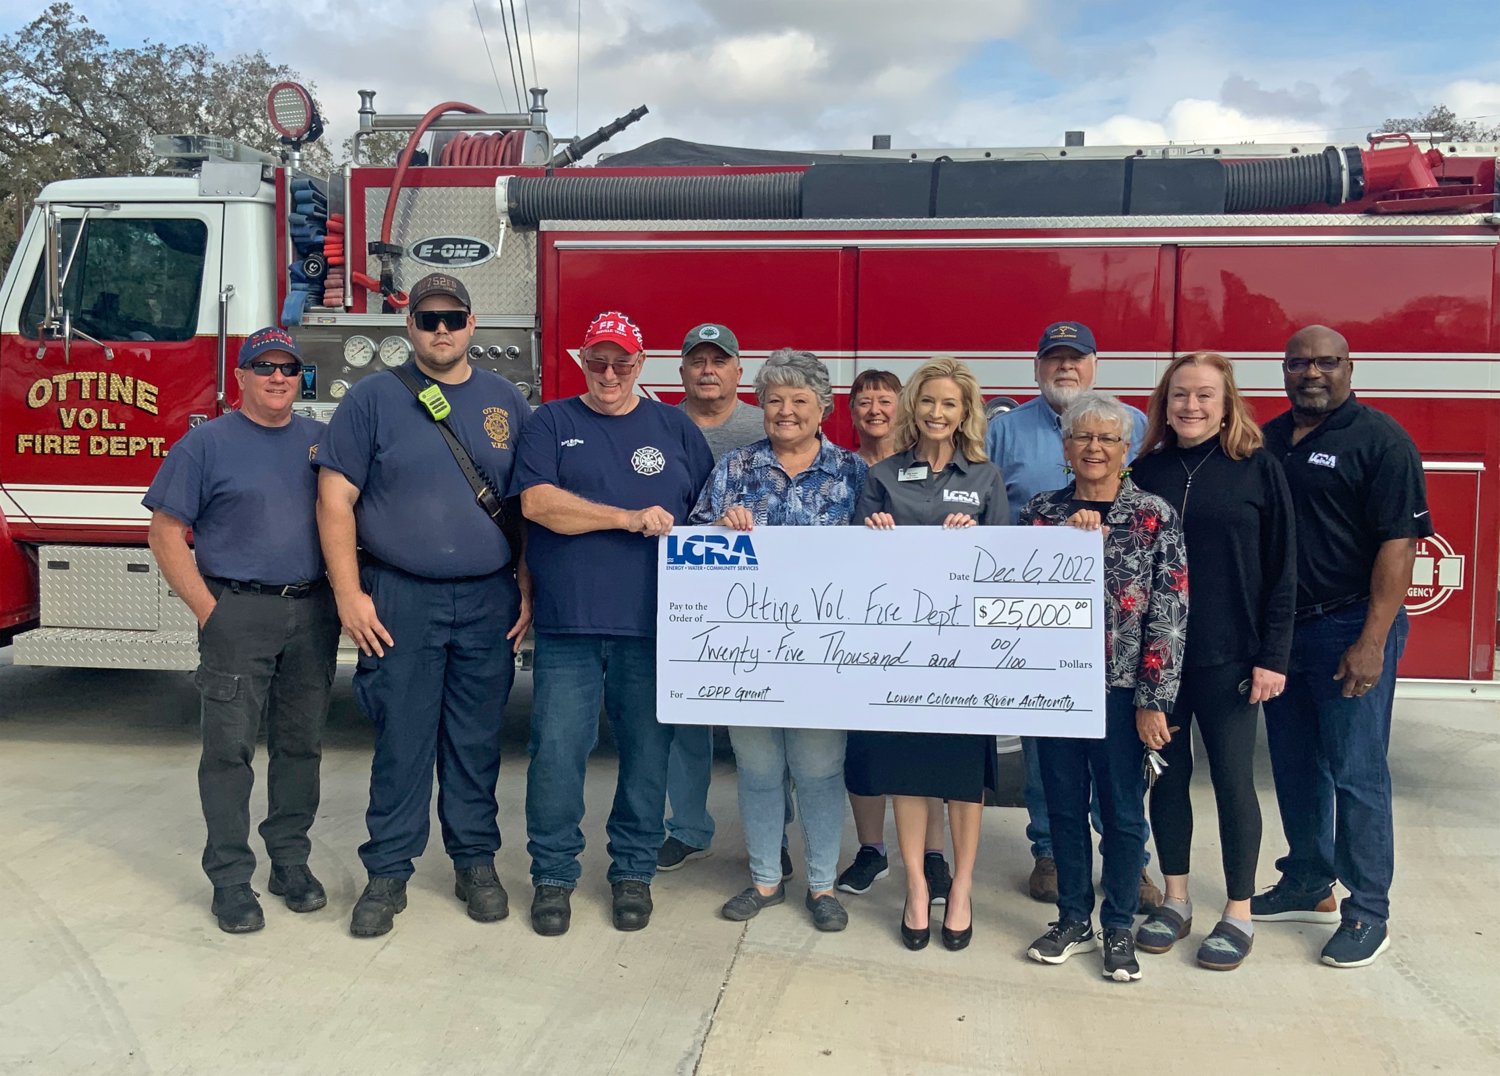 LCRA representatives present a $25,000 grant to the Ottine Volunteer Fire Department for a new brush truck cab and chassis. The grant is part of LCRA’s Community Development Partnership Program. Pictured, from left to right, are: Robert Riley, firefighter; Donnie Grauke Jr., second assistant fire chief; John Everett, fire chief; James "Bubba" Boehm, VFD board member; Pam Walshak, VFD president; Debbie Everett, VFD secretary/treasurer; Margaret D. “Meg” Voelter, LCRA Board member; Ray Colmenares, VFD audit committee; Kay Floyd and Tina "DeDe" DeStefano, VFD board members; and Rick Arnic, LCRA Regional Affairs representative.